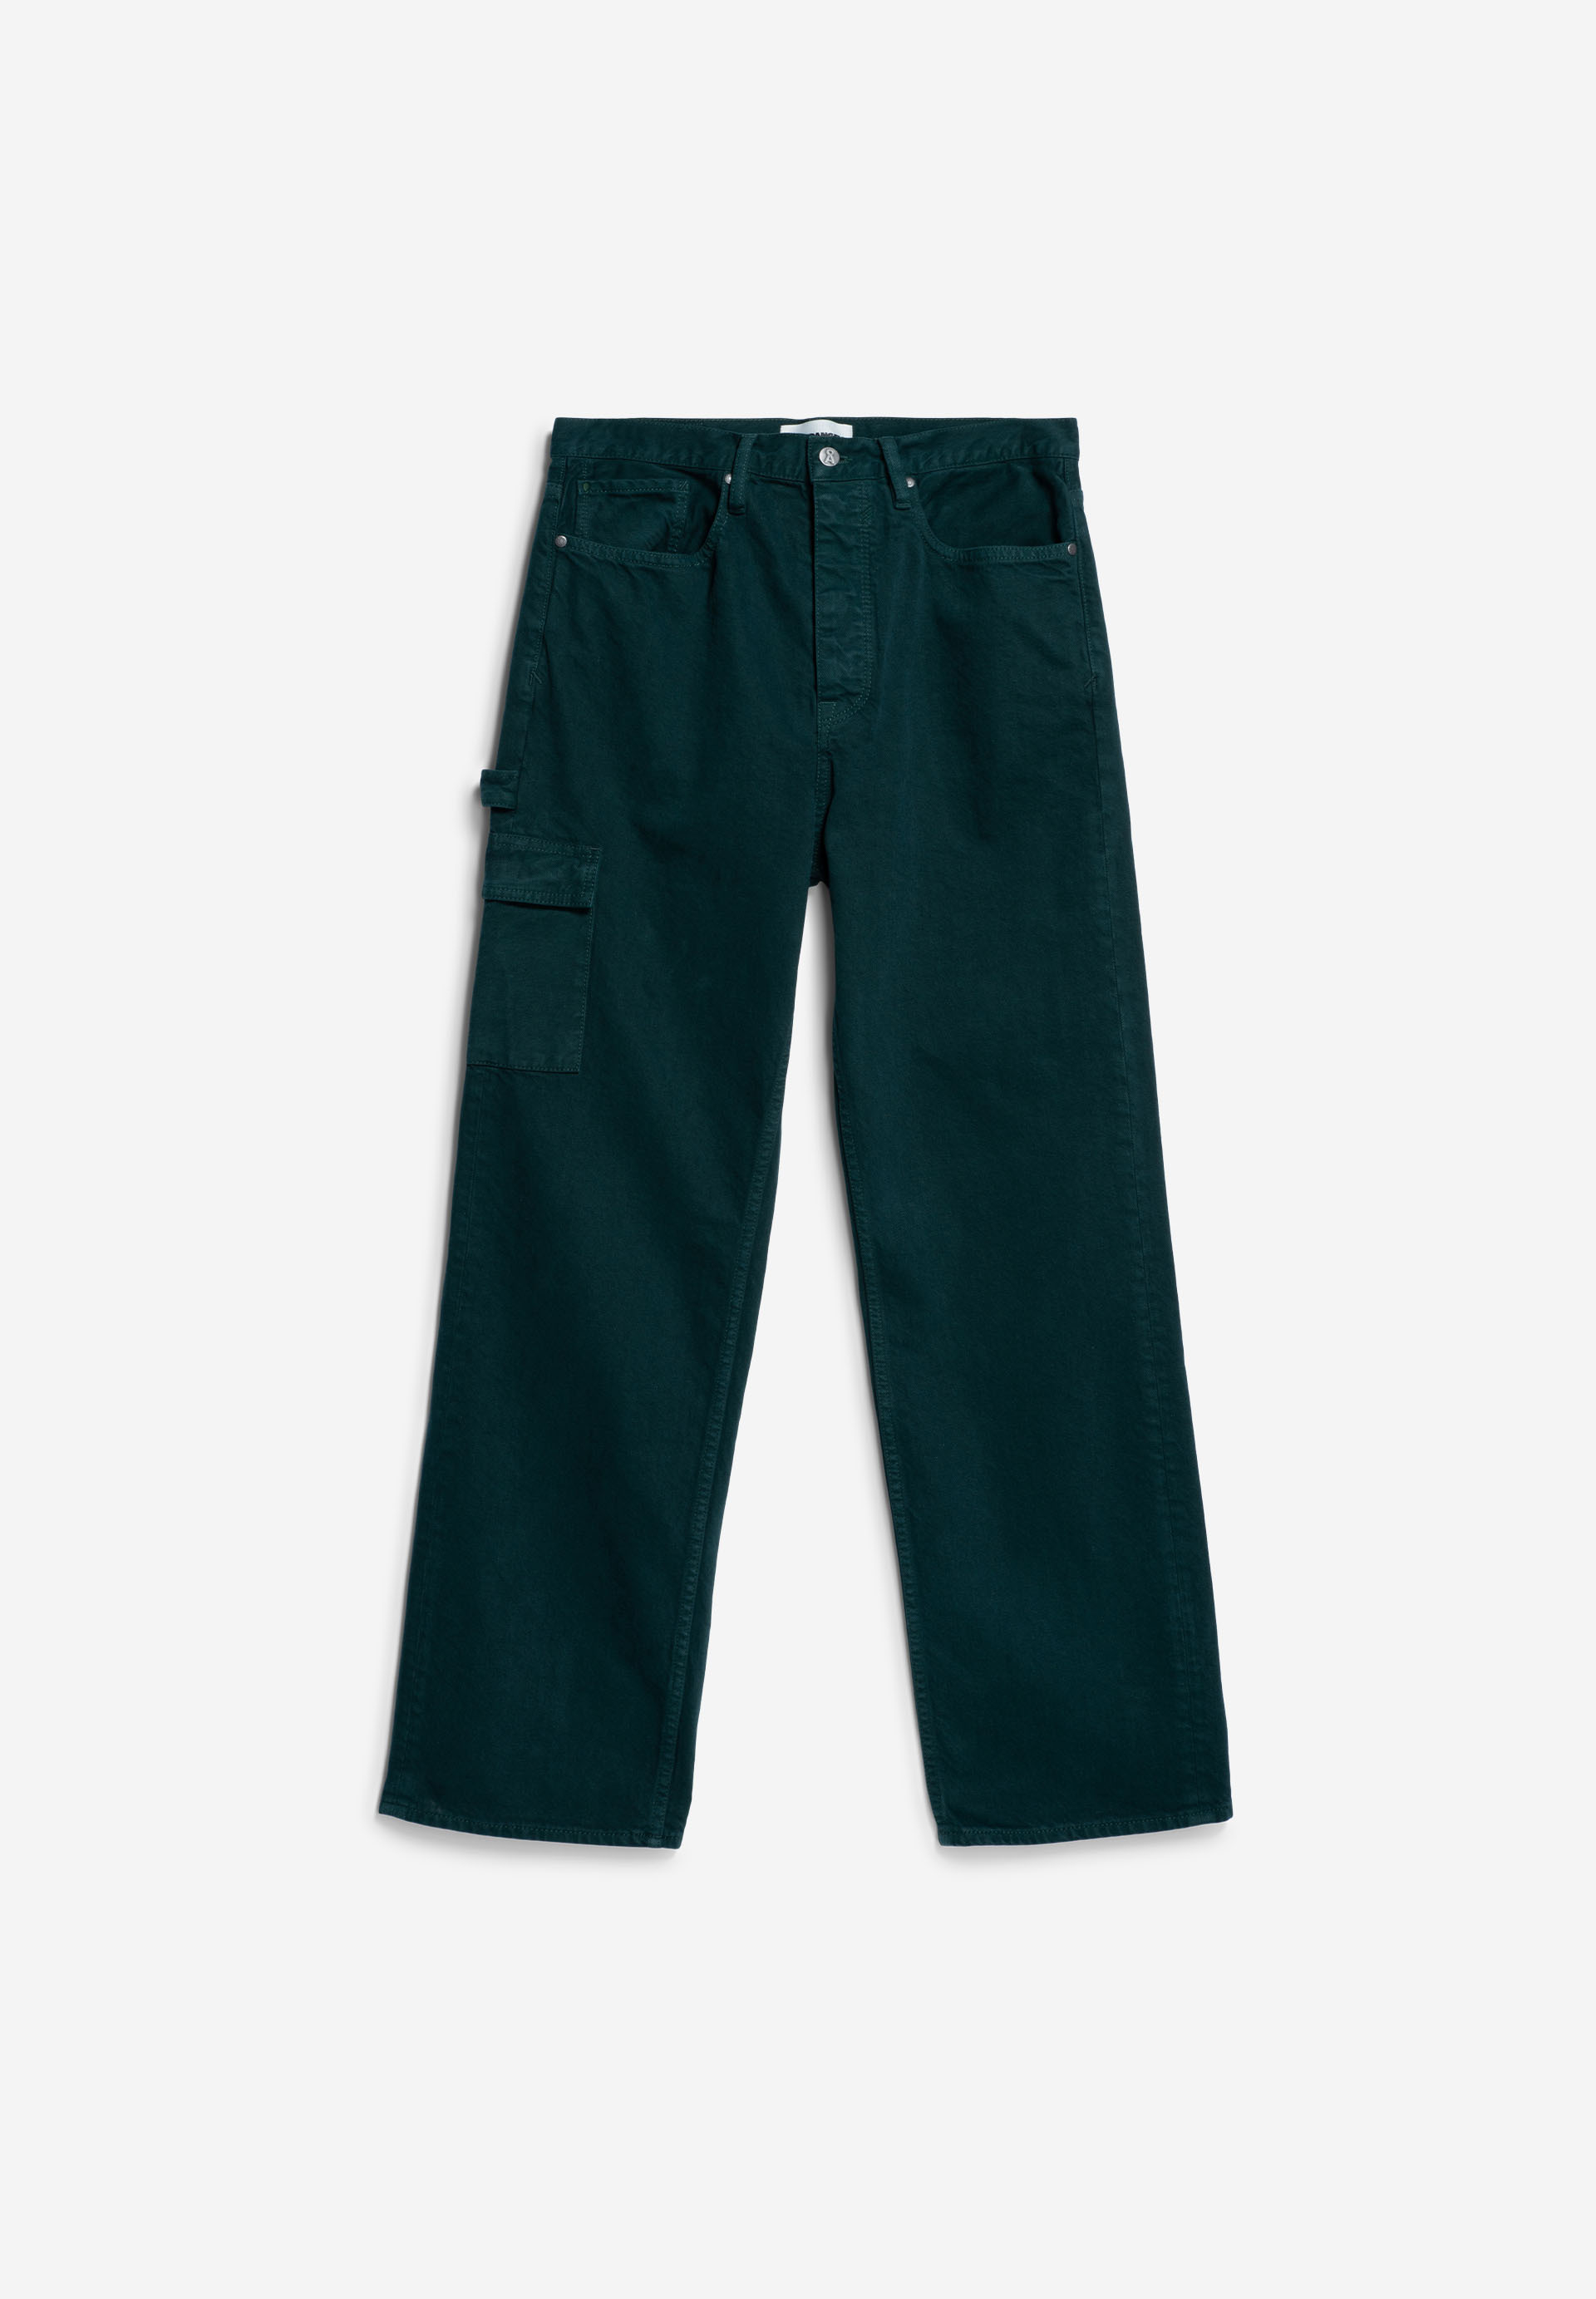 TAATO CARPENTER Relaxed Fit Denim made of recycled Cotton